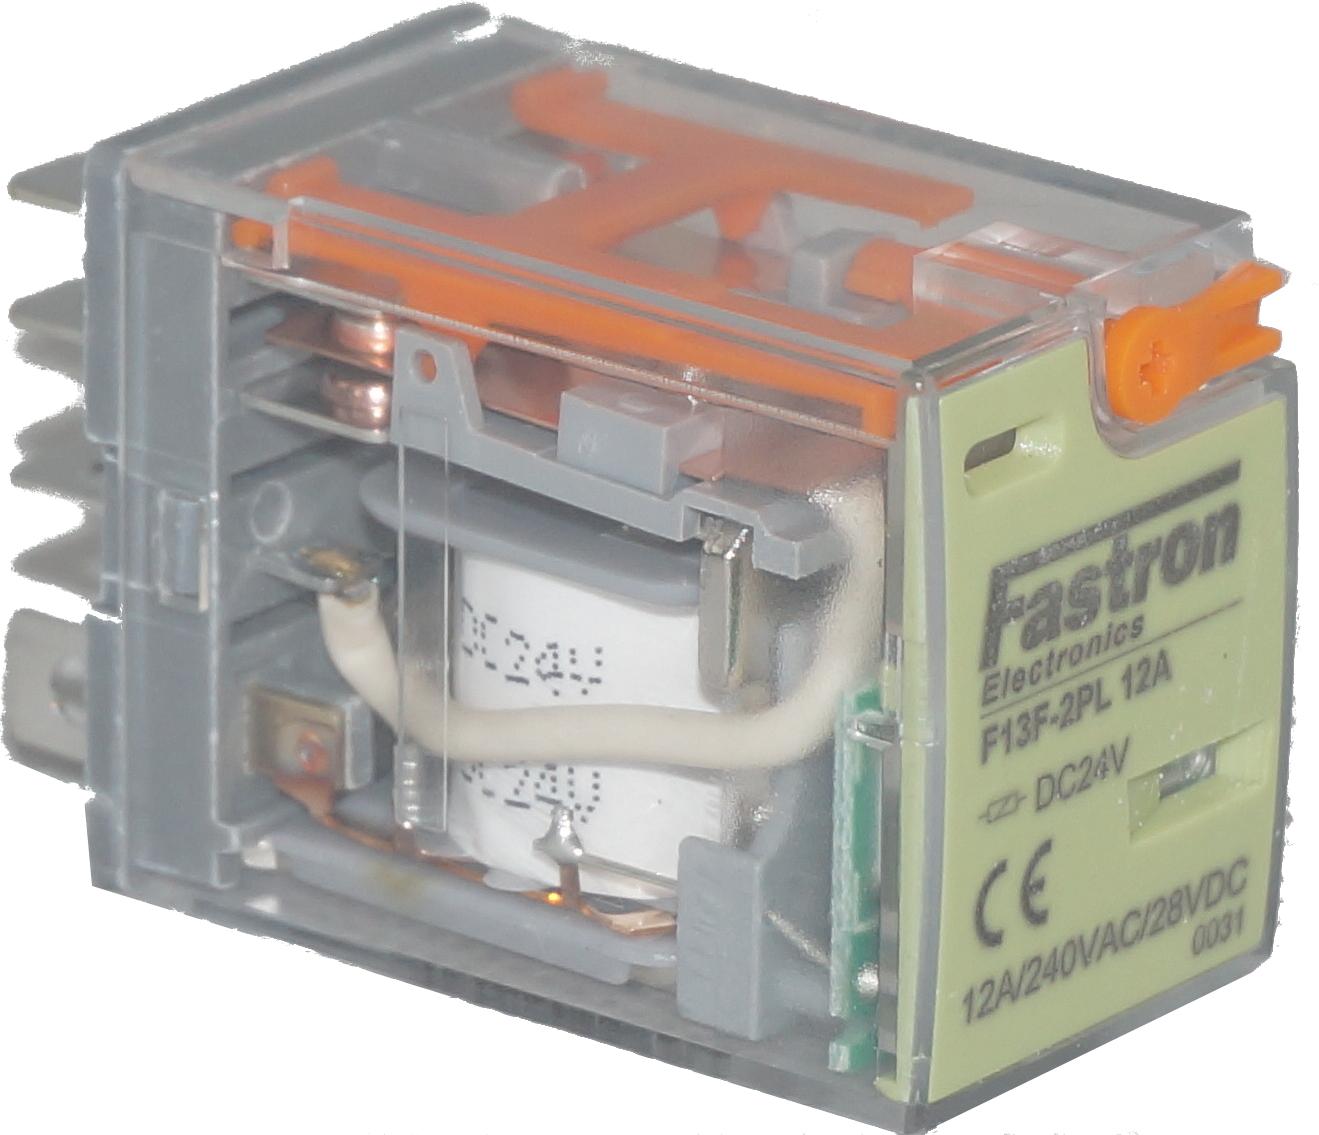 F13F-2PL 12A 240VAC DPDT Relay, 2 x 12 Amp Form C, 250VAC/30VDC Load, 240VAC Coil-Relay-Fastron Electronics-Fastron Electronics Store